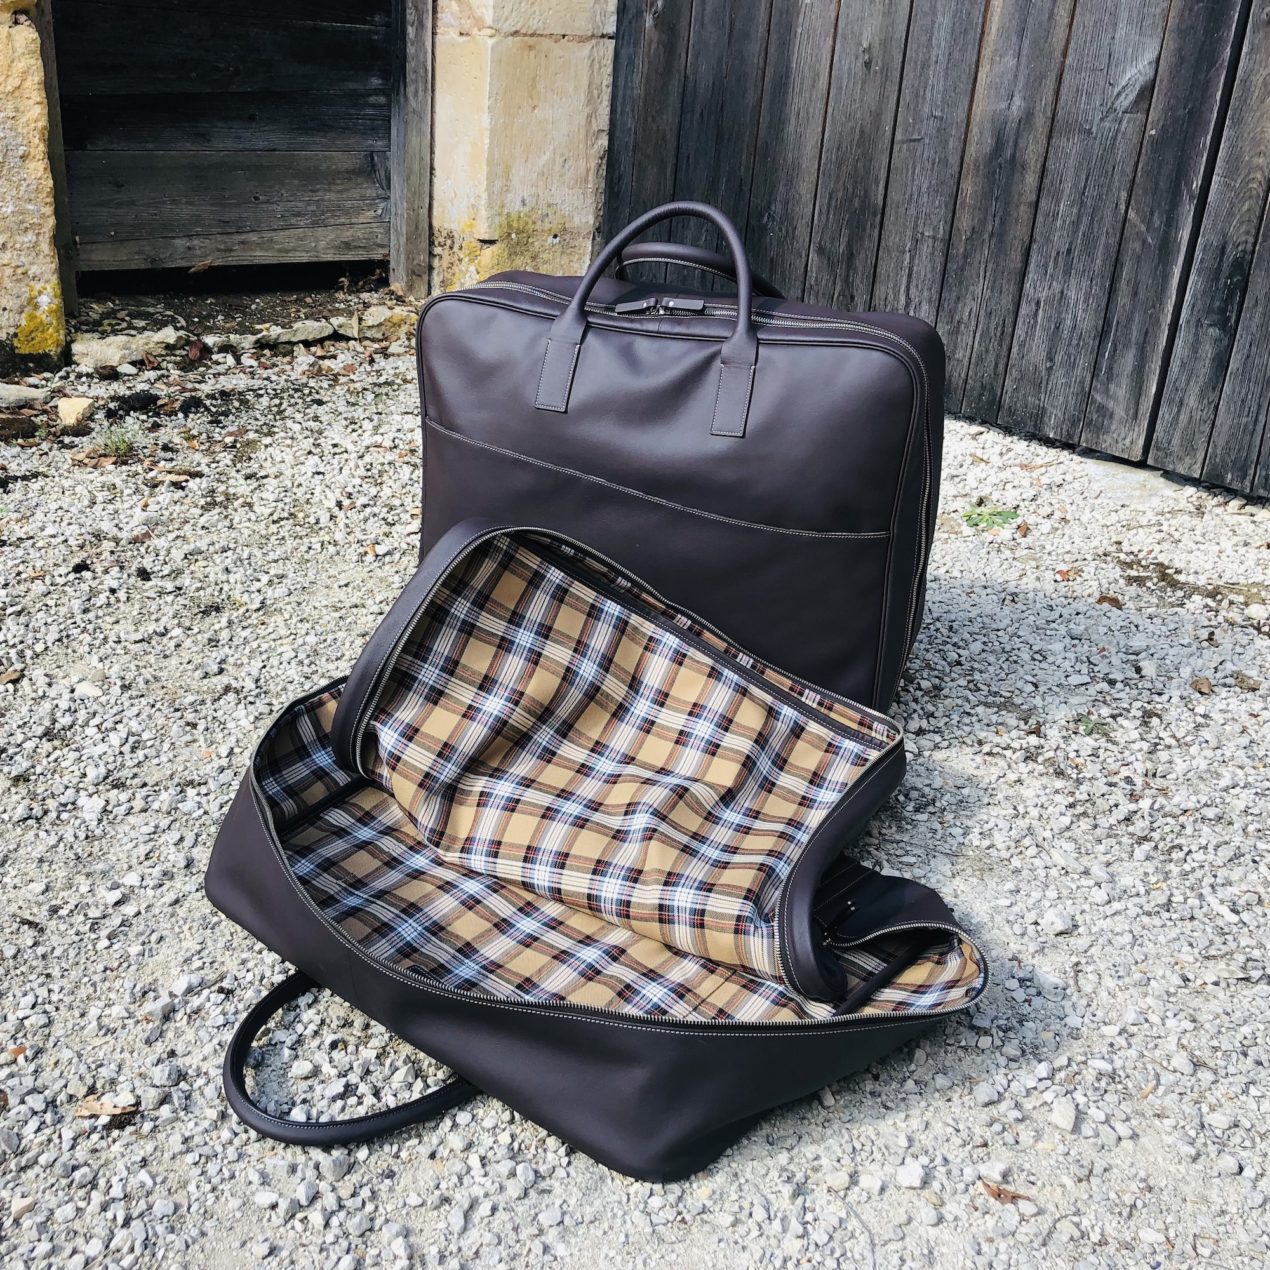 Brown leather goods for Aston Martin Virage DB9 Set of luggage with lining in Scottish tartan Schedoni